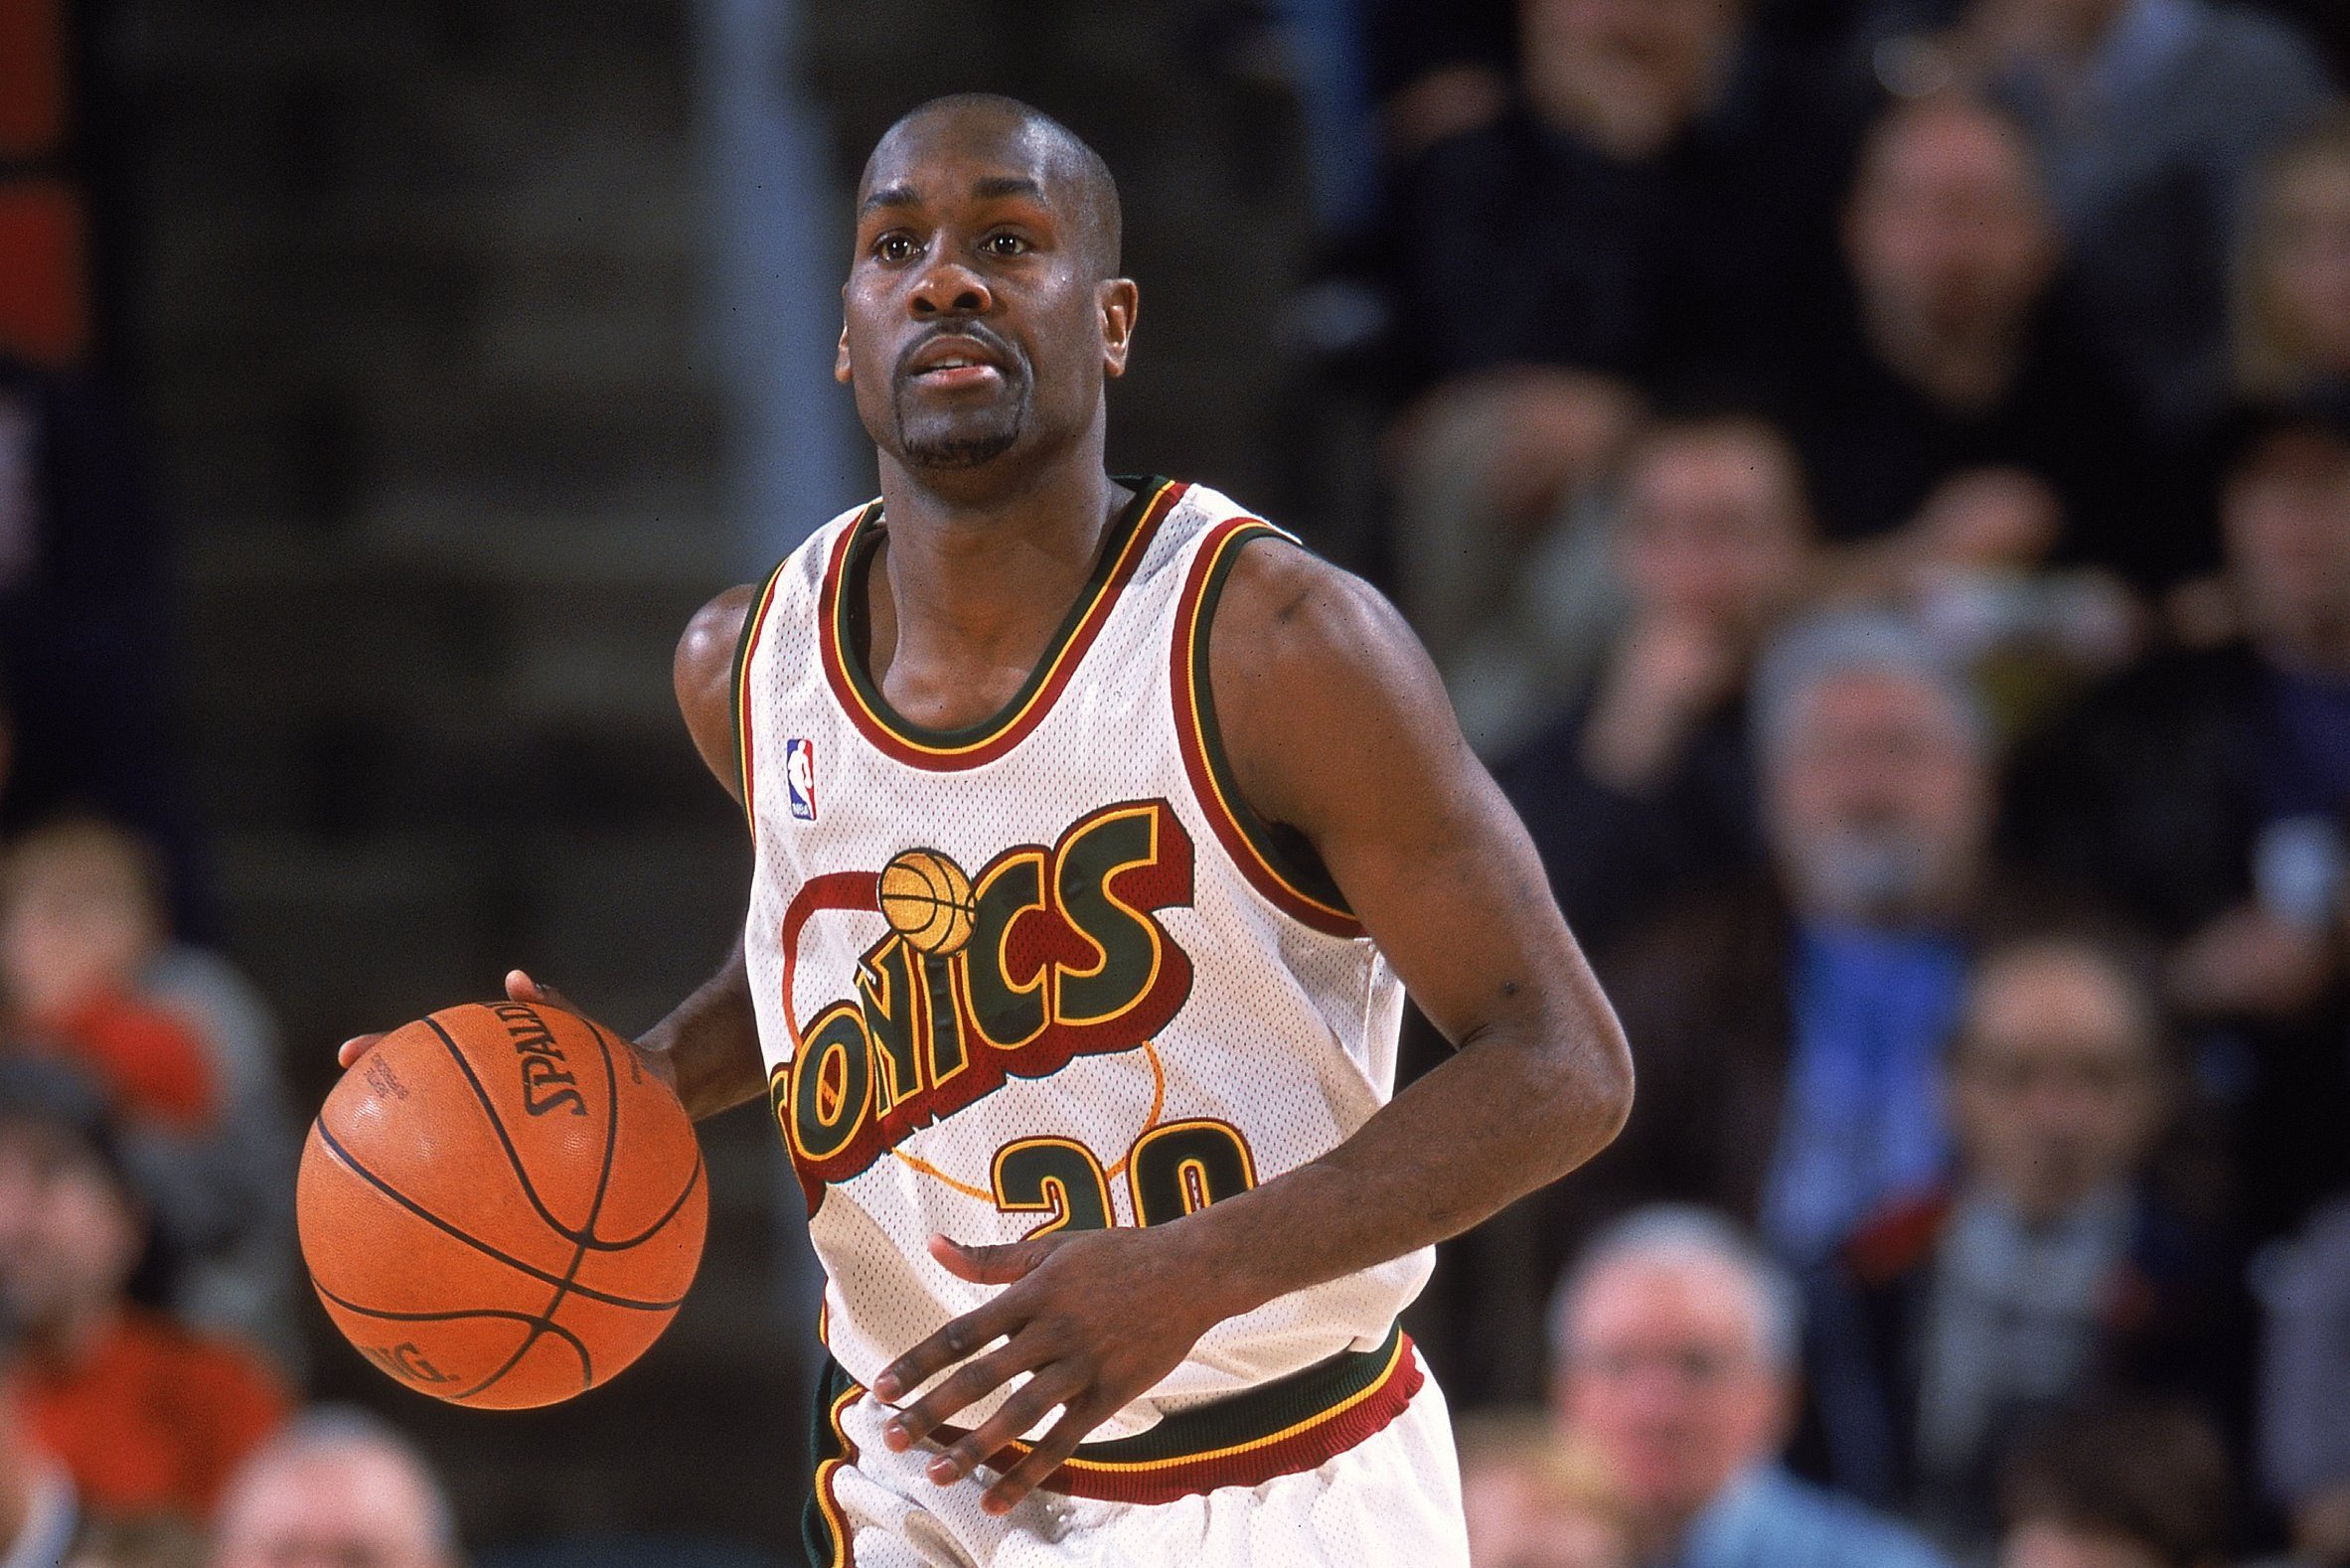 Not in Hall of Fame - 5. Mookie Blaylock